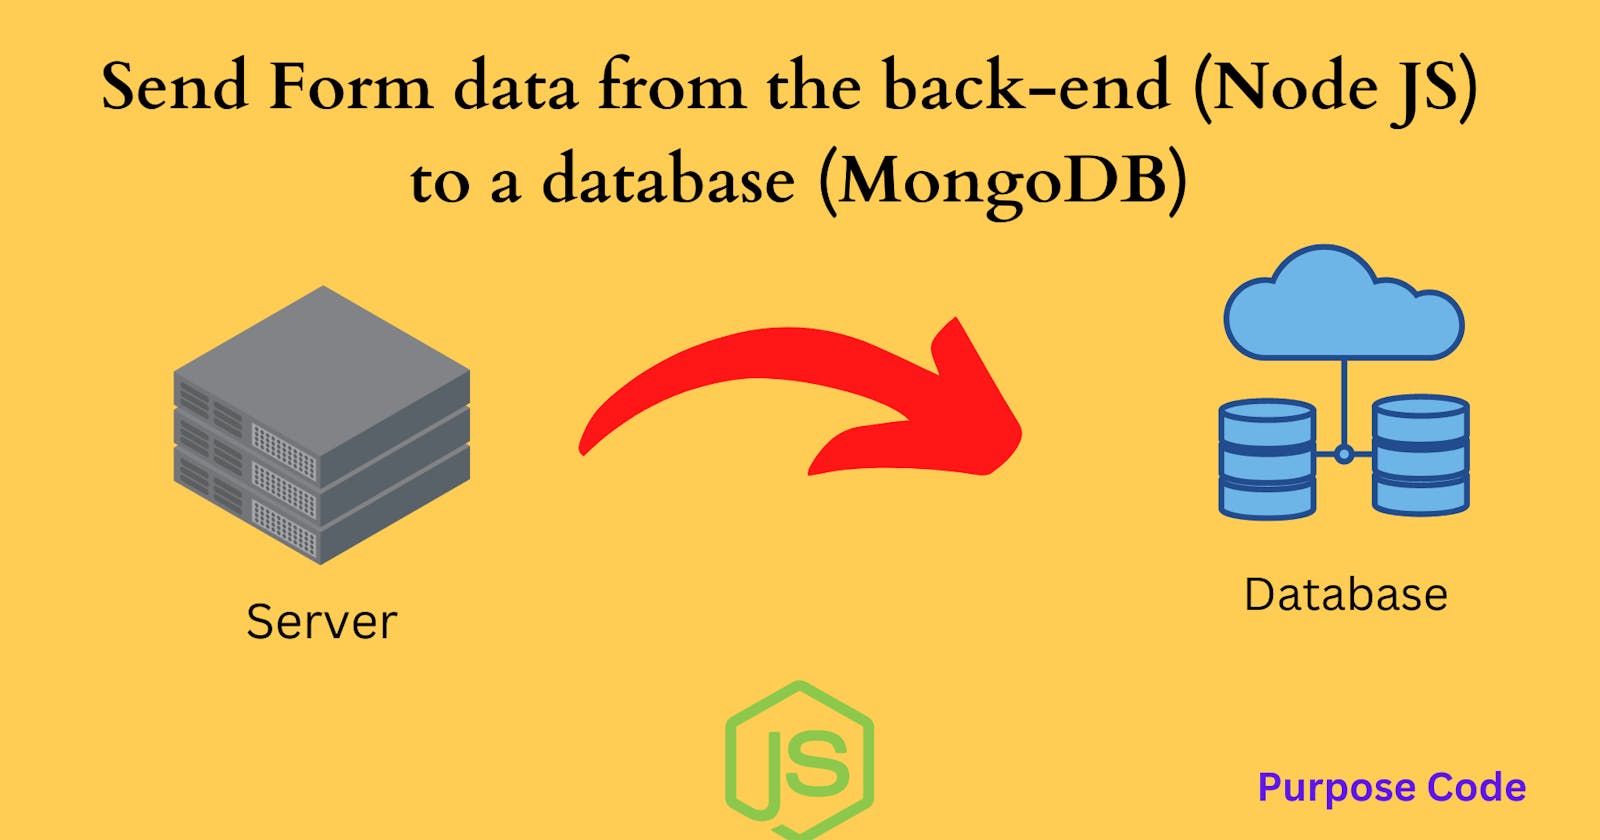 Store Form data received in the back-end in the database (MongoDB)